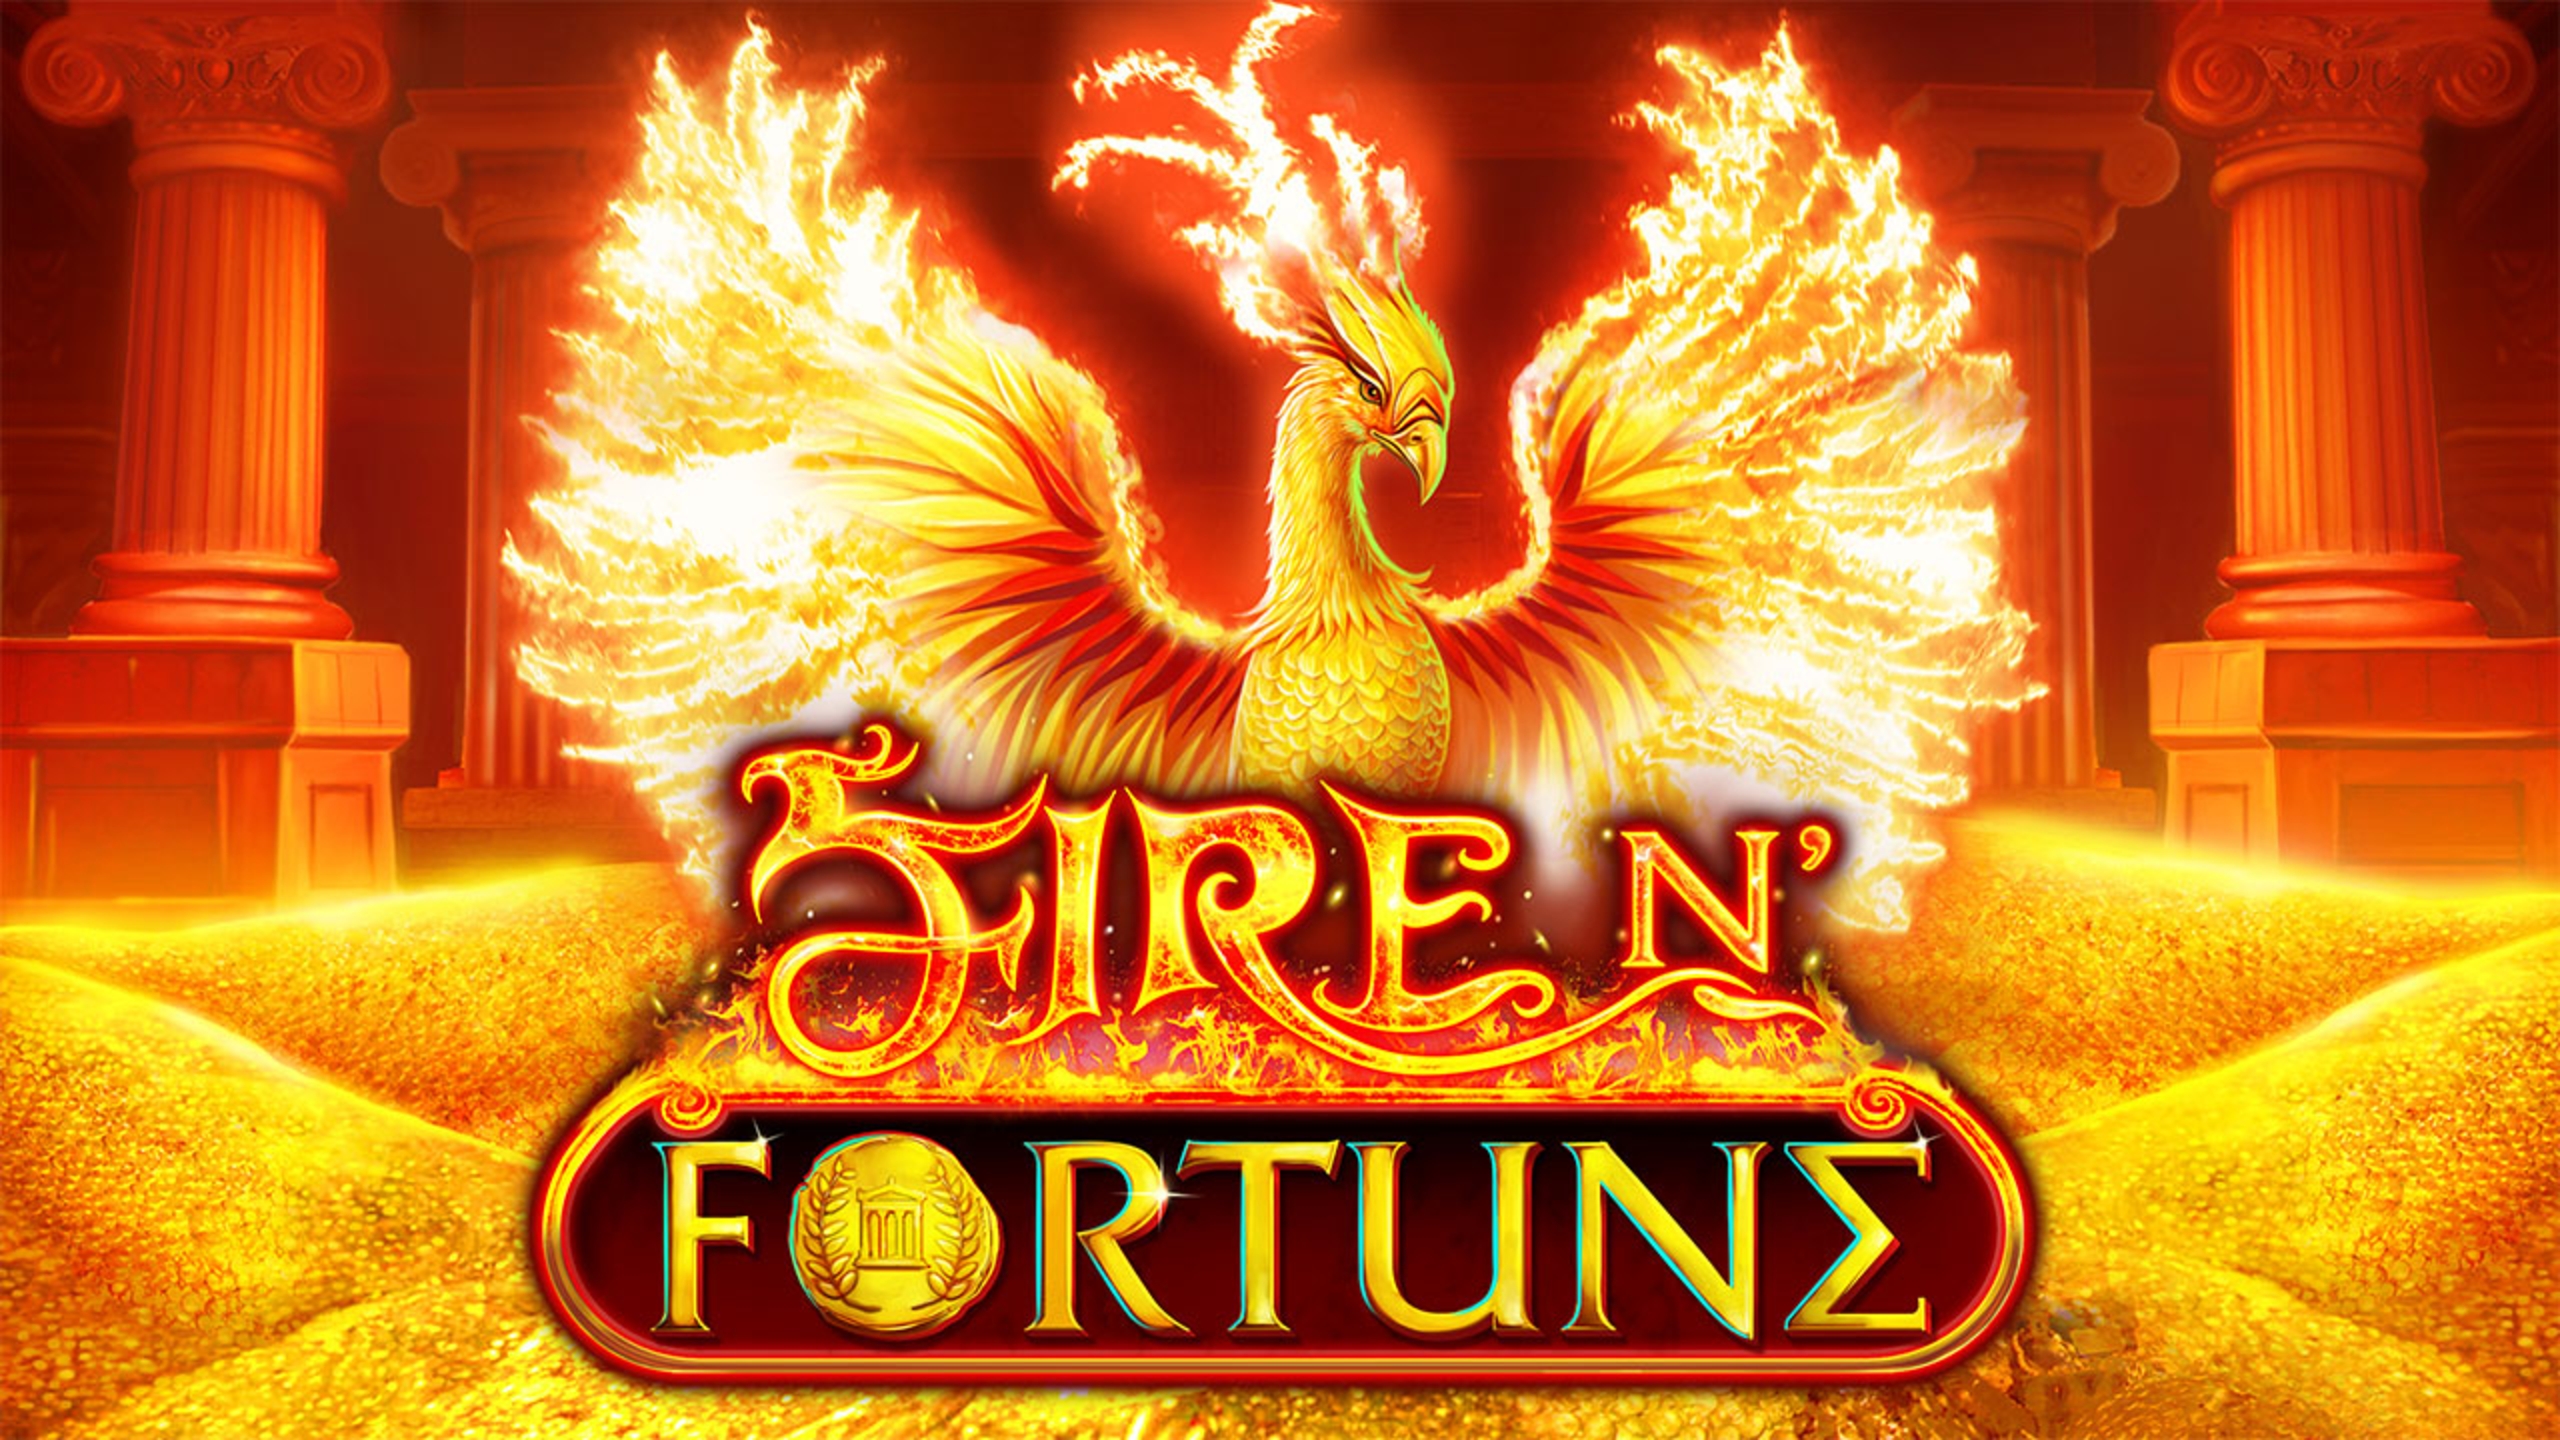 Fire N' Fortune demo